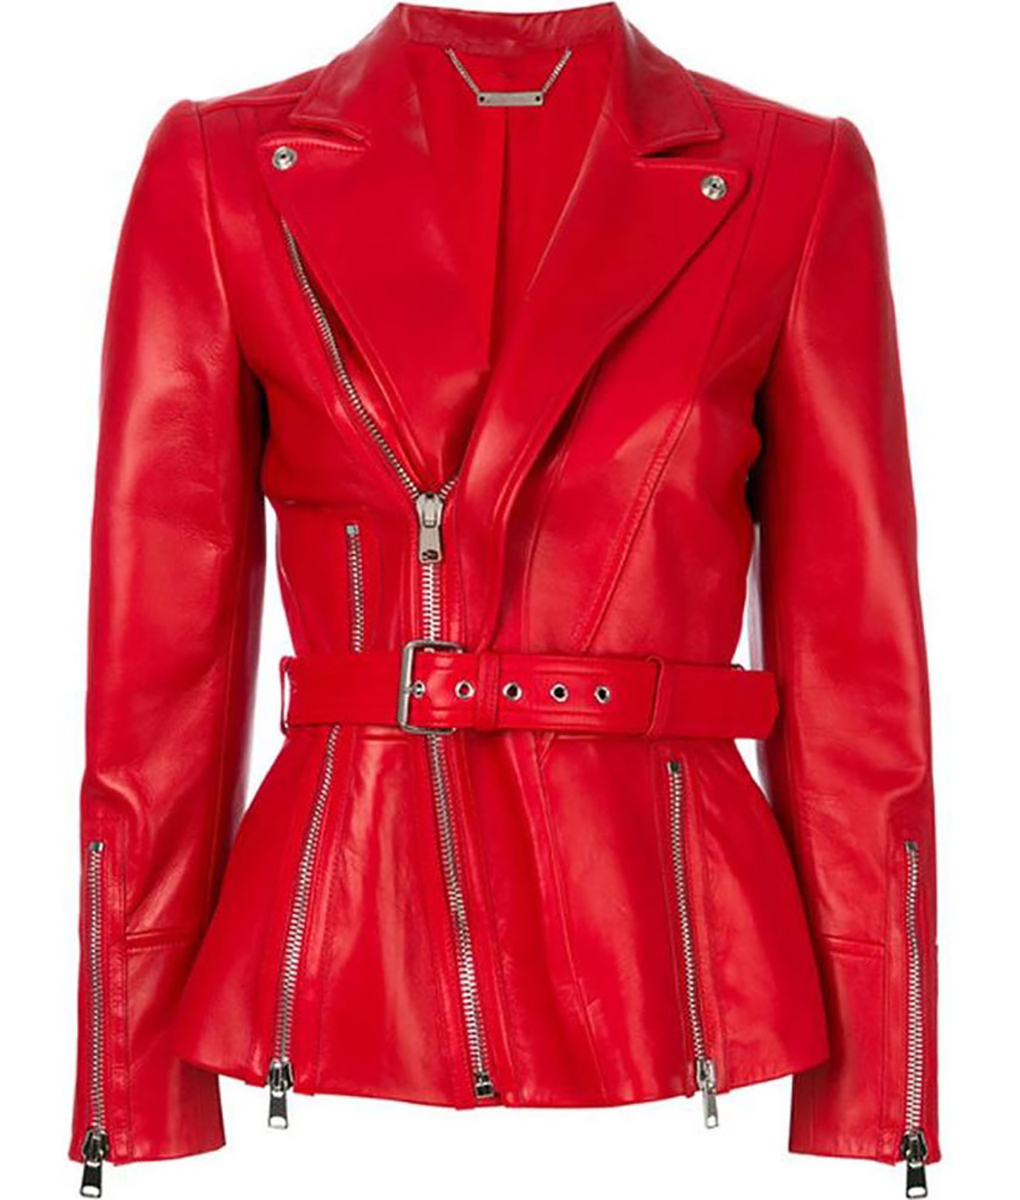 Women’s Belted Red Leather Jacket | The Leather City